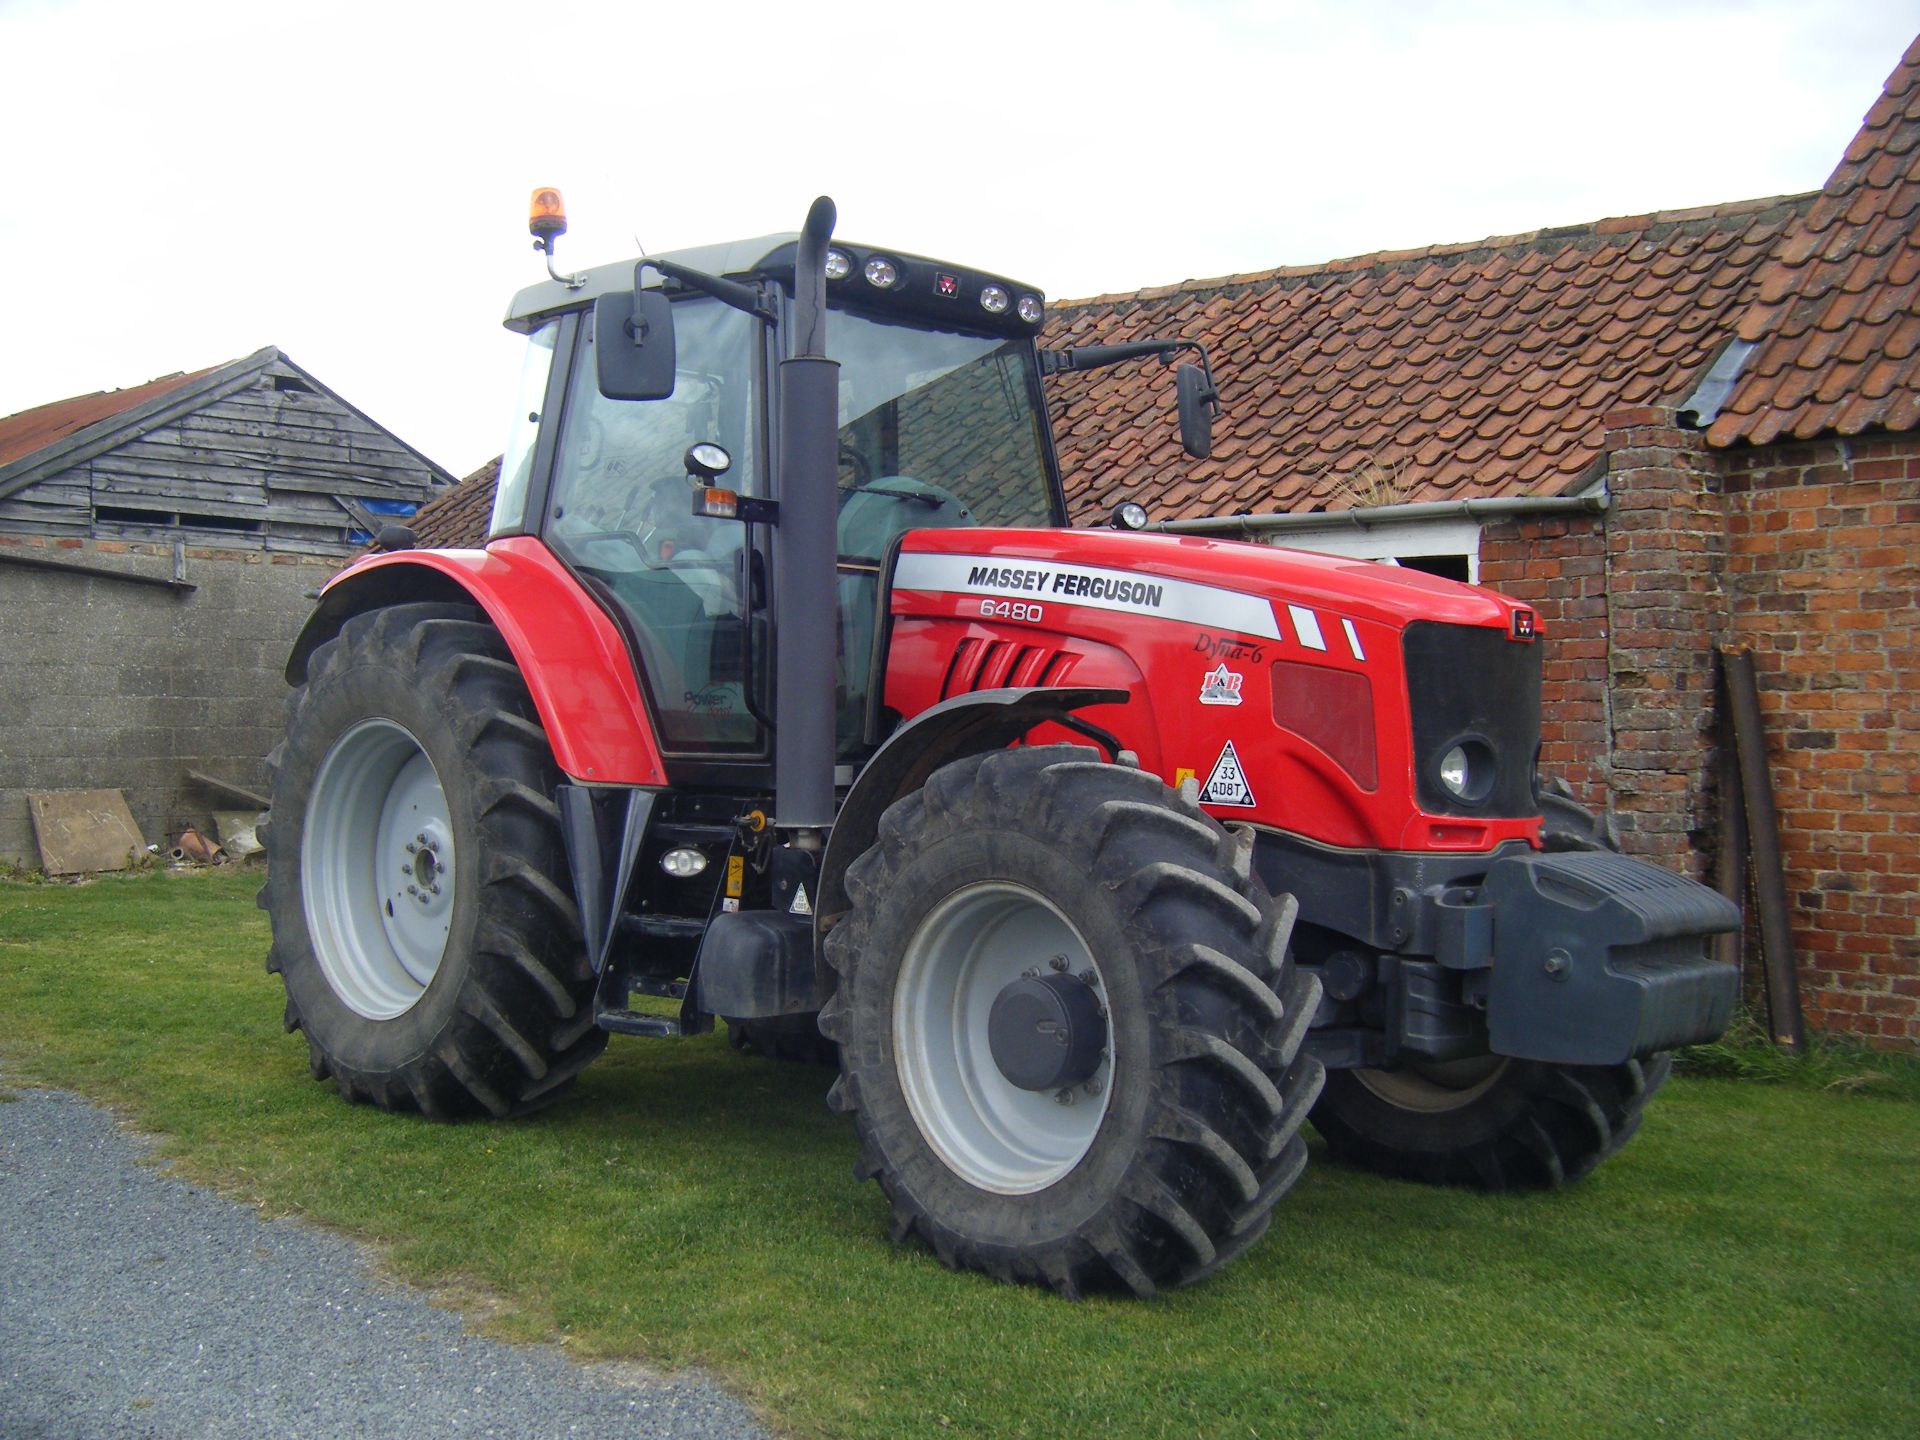 Massey Ferguson 6480 Dyna 6, 2011, 1,049 hrs - Location - Louth, - Image 5 of 6